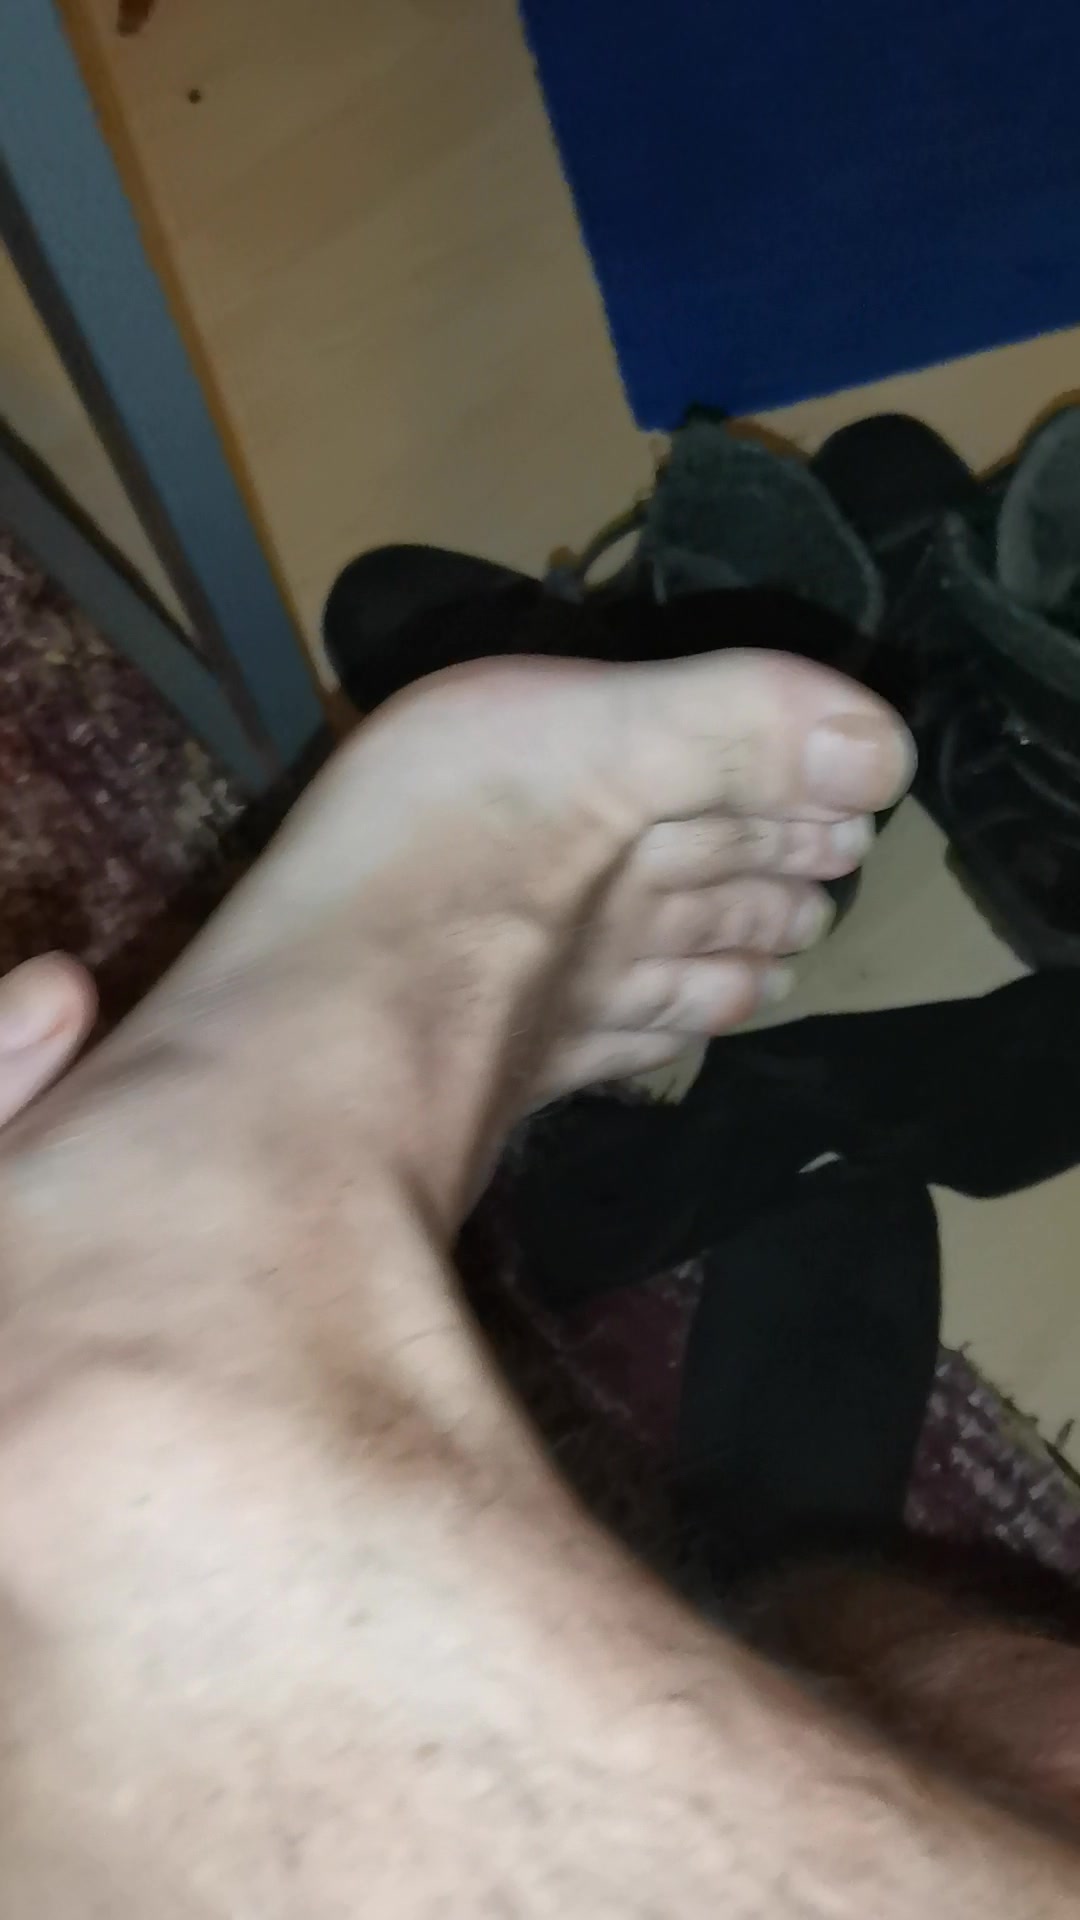 taking off socks and pissing feet with old long nails